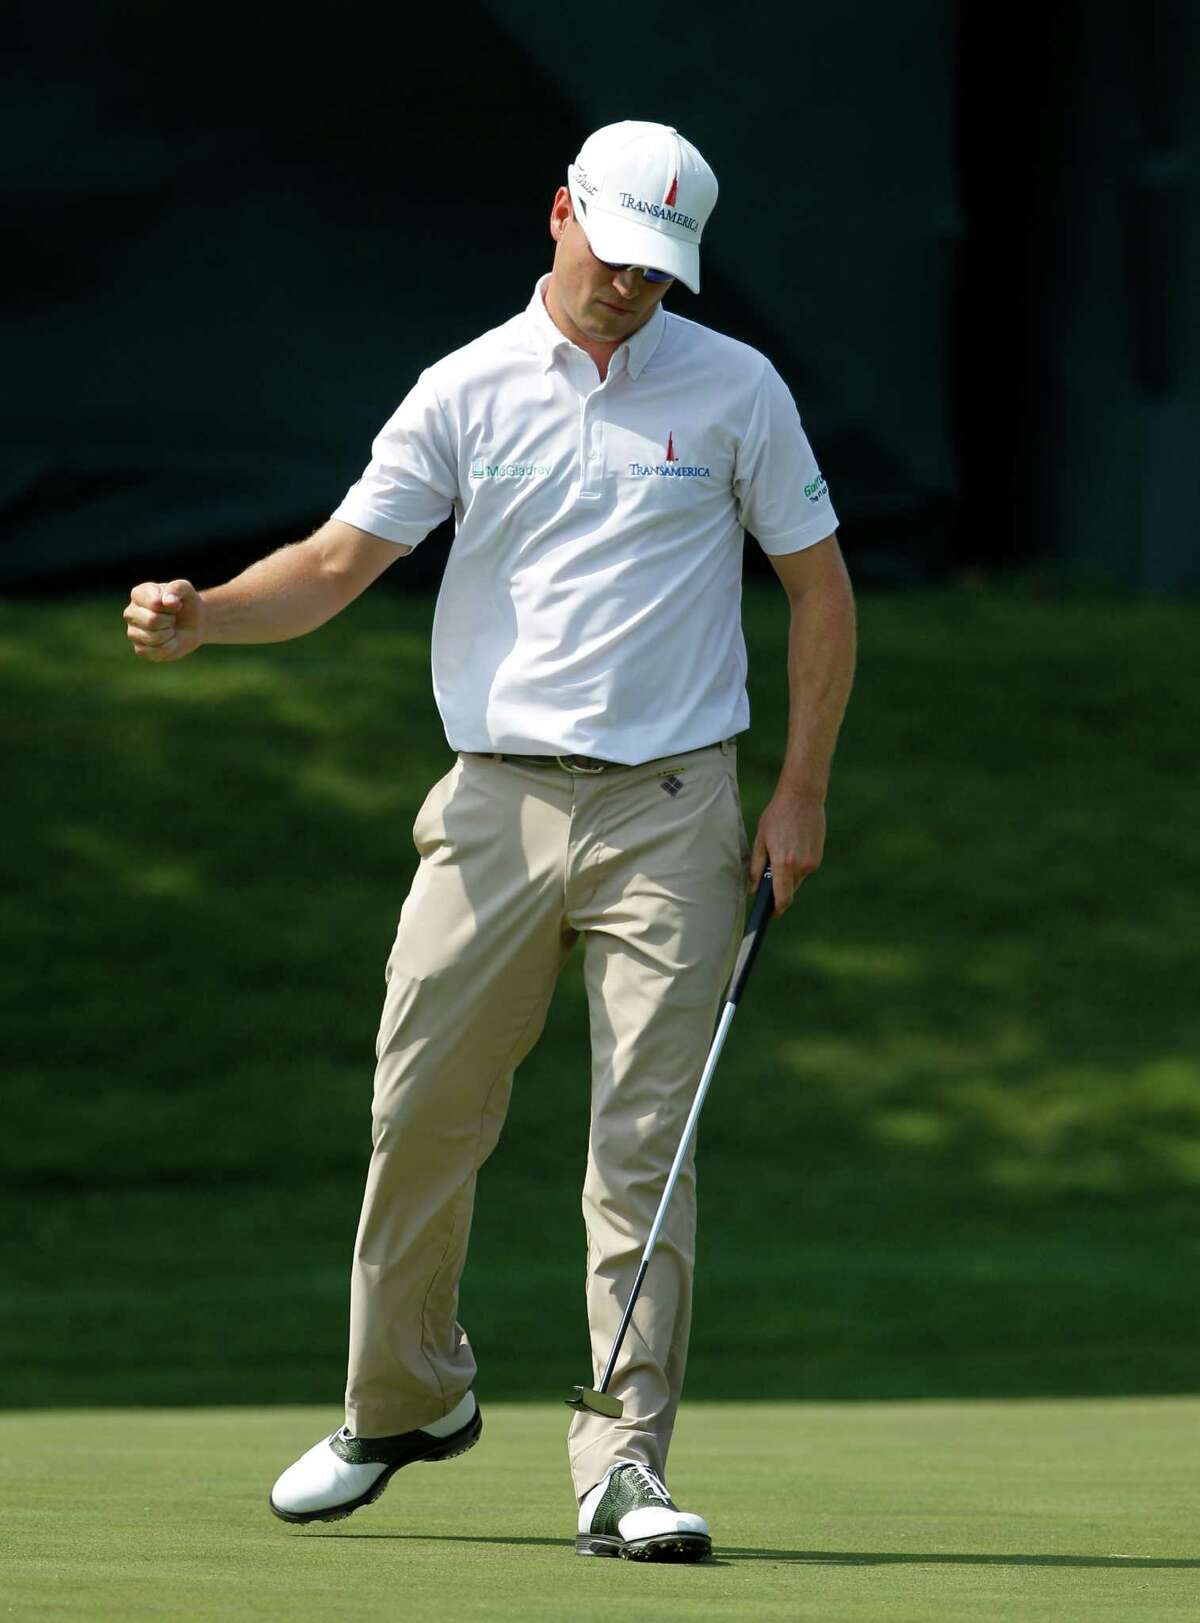 Zach Johnson celebrates after sinking a birdie putt on 16 during the second round of the PGA Colonial golf tournament on Friday, May 25, 2012, in Fort Worth, Texas.